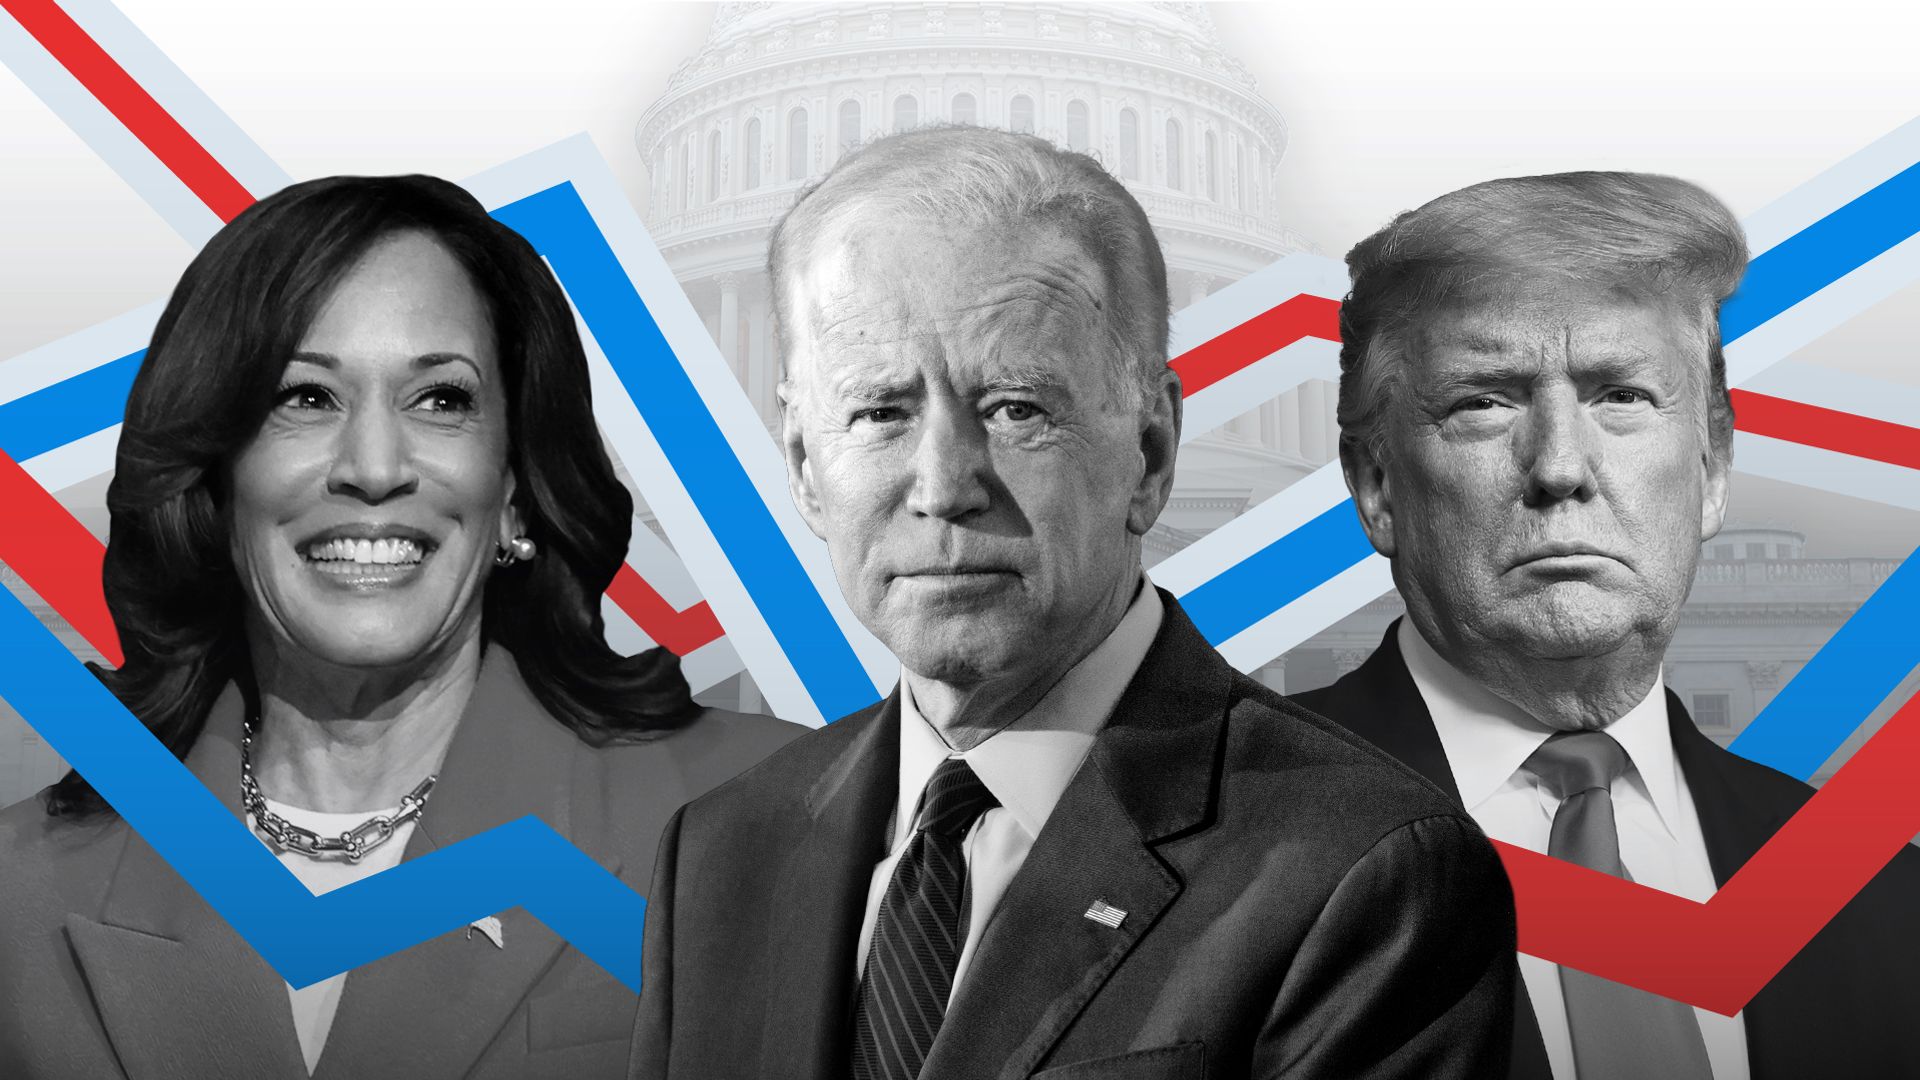 What bookies say about Harris's chance of becoming president